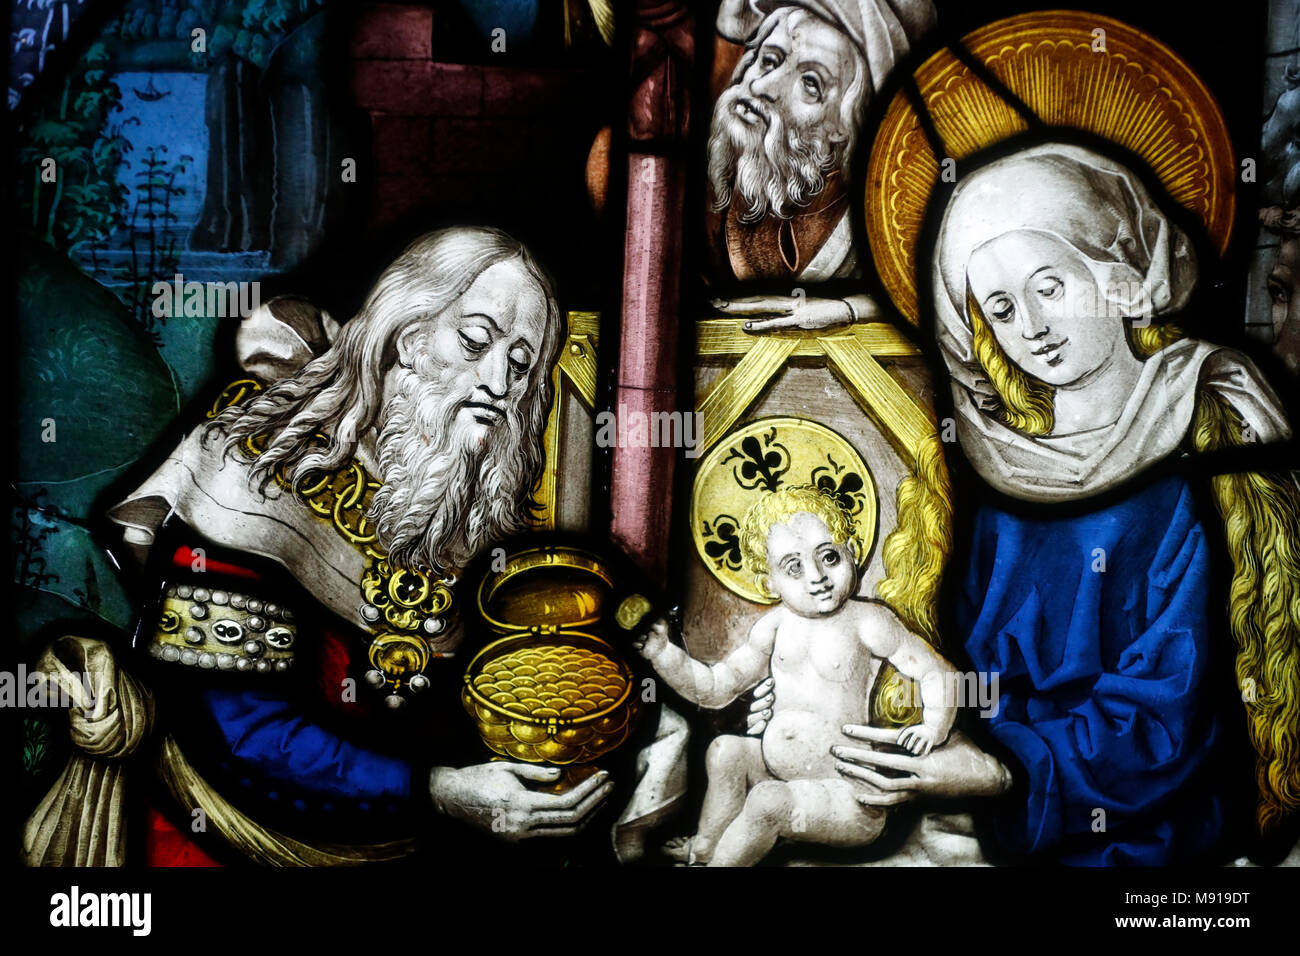 Oeuvre Notre-Dame Museum.  Stained glass window.  Strasbourg. France. Stock Photo